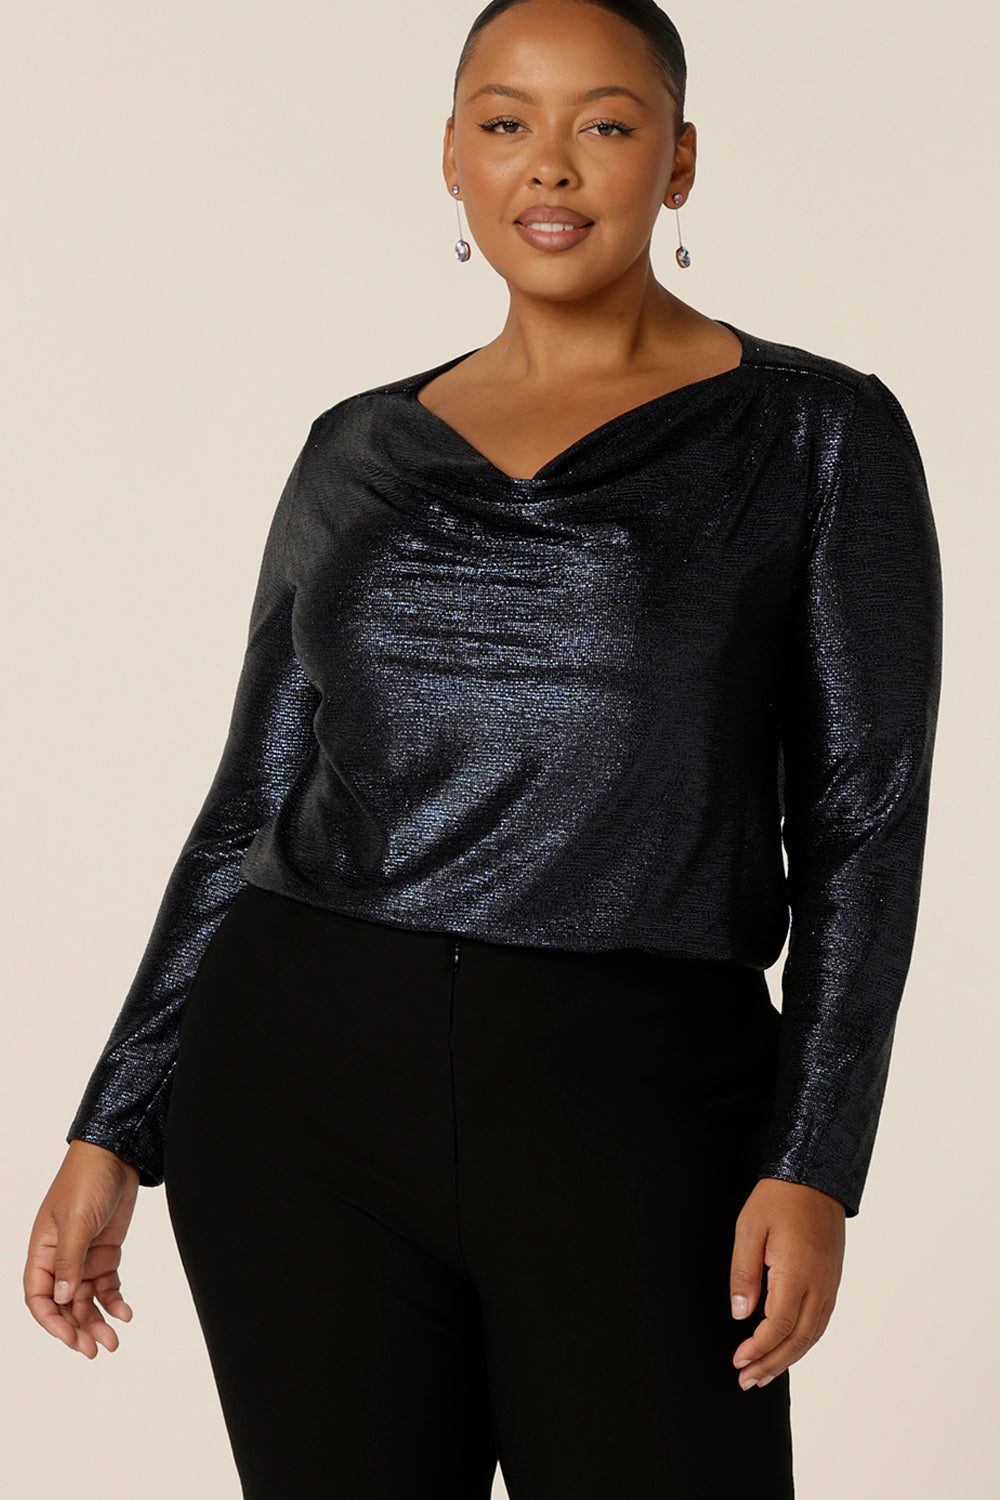 A size 18 woman wears a long sleeve occasionwear top with cowl neck in shimmering midnight blue jersey fabric. A great evening wear top for fuller figures, this long sleeve top wears well for special events and cocktail parties. Made in Australia, this semi-formal top sparkles in sizes 8 to 24 .